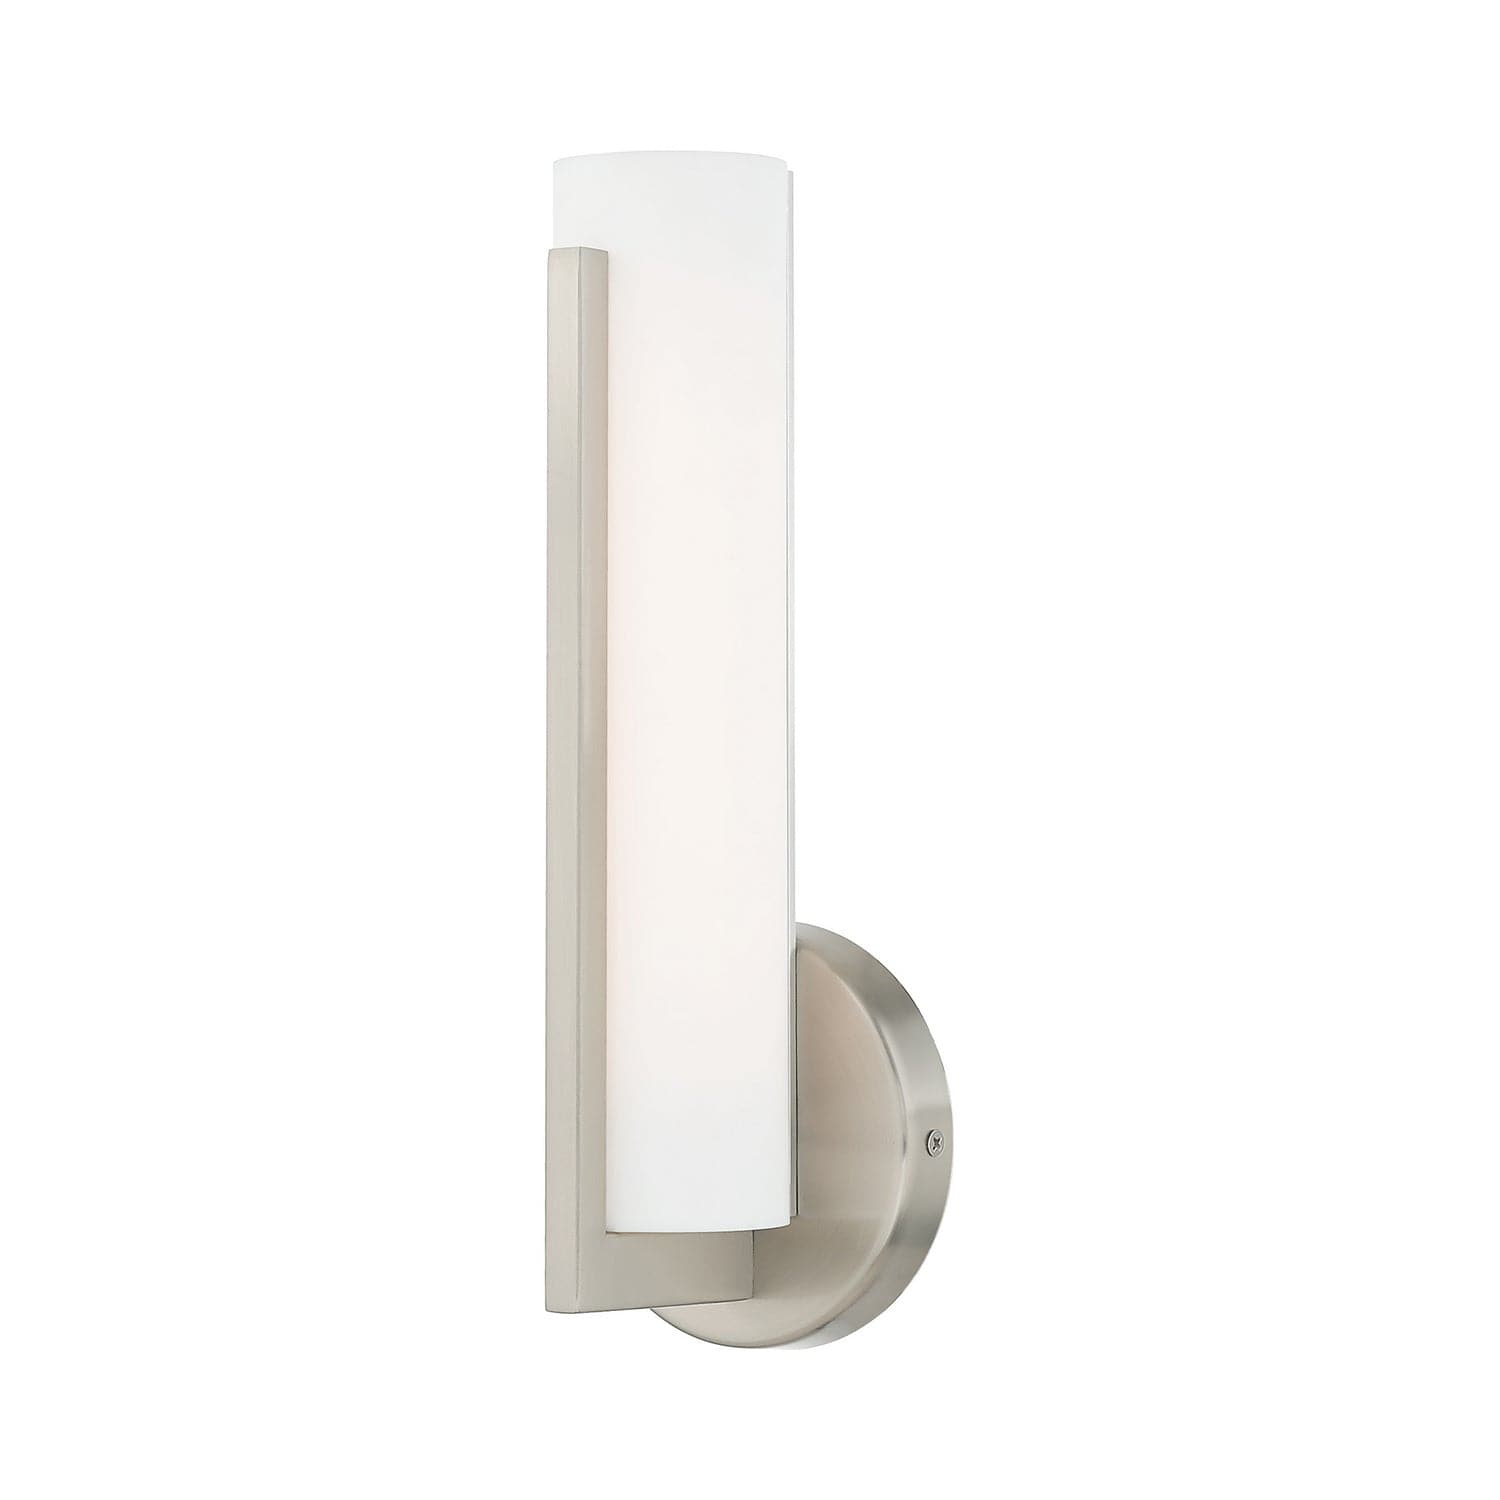 Livex Lighting - 10351-91 - LED Wall Sconce - Visby - Brushed Nickel